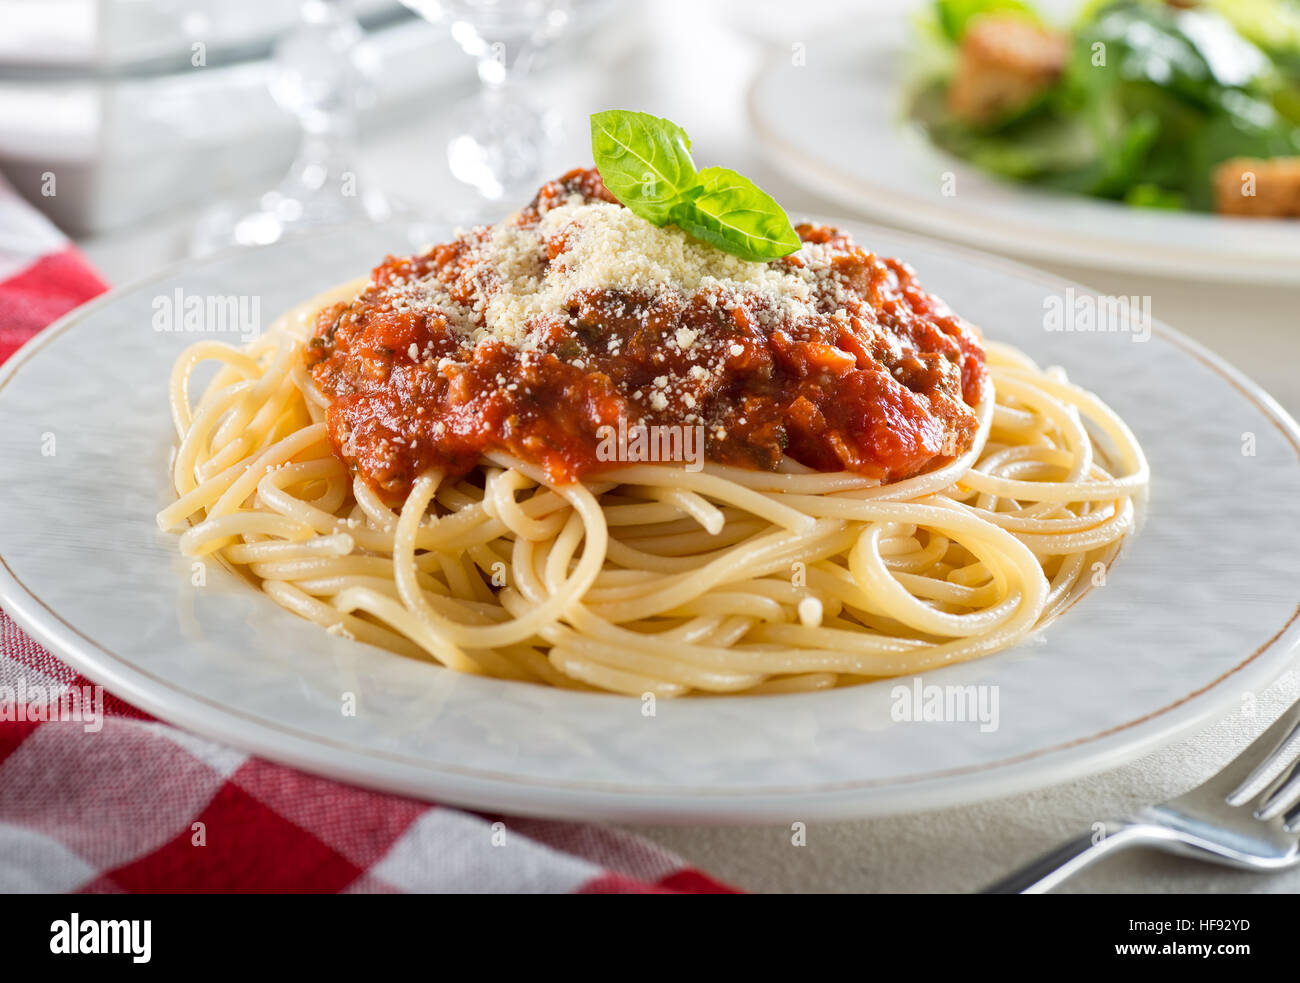 A plate of delicious spaghetti bolognese with meat sauce and fresh basil. Stock Photo